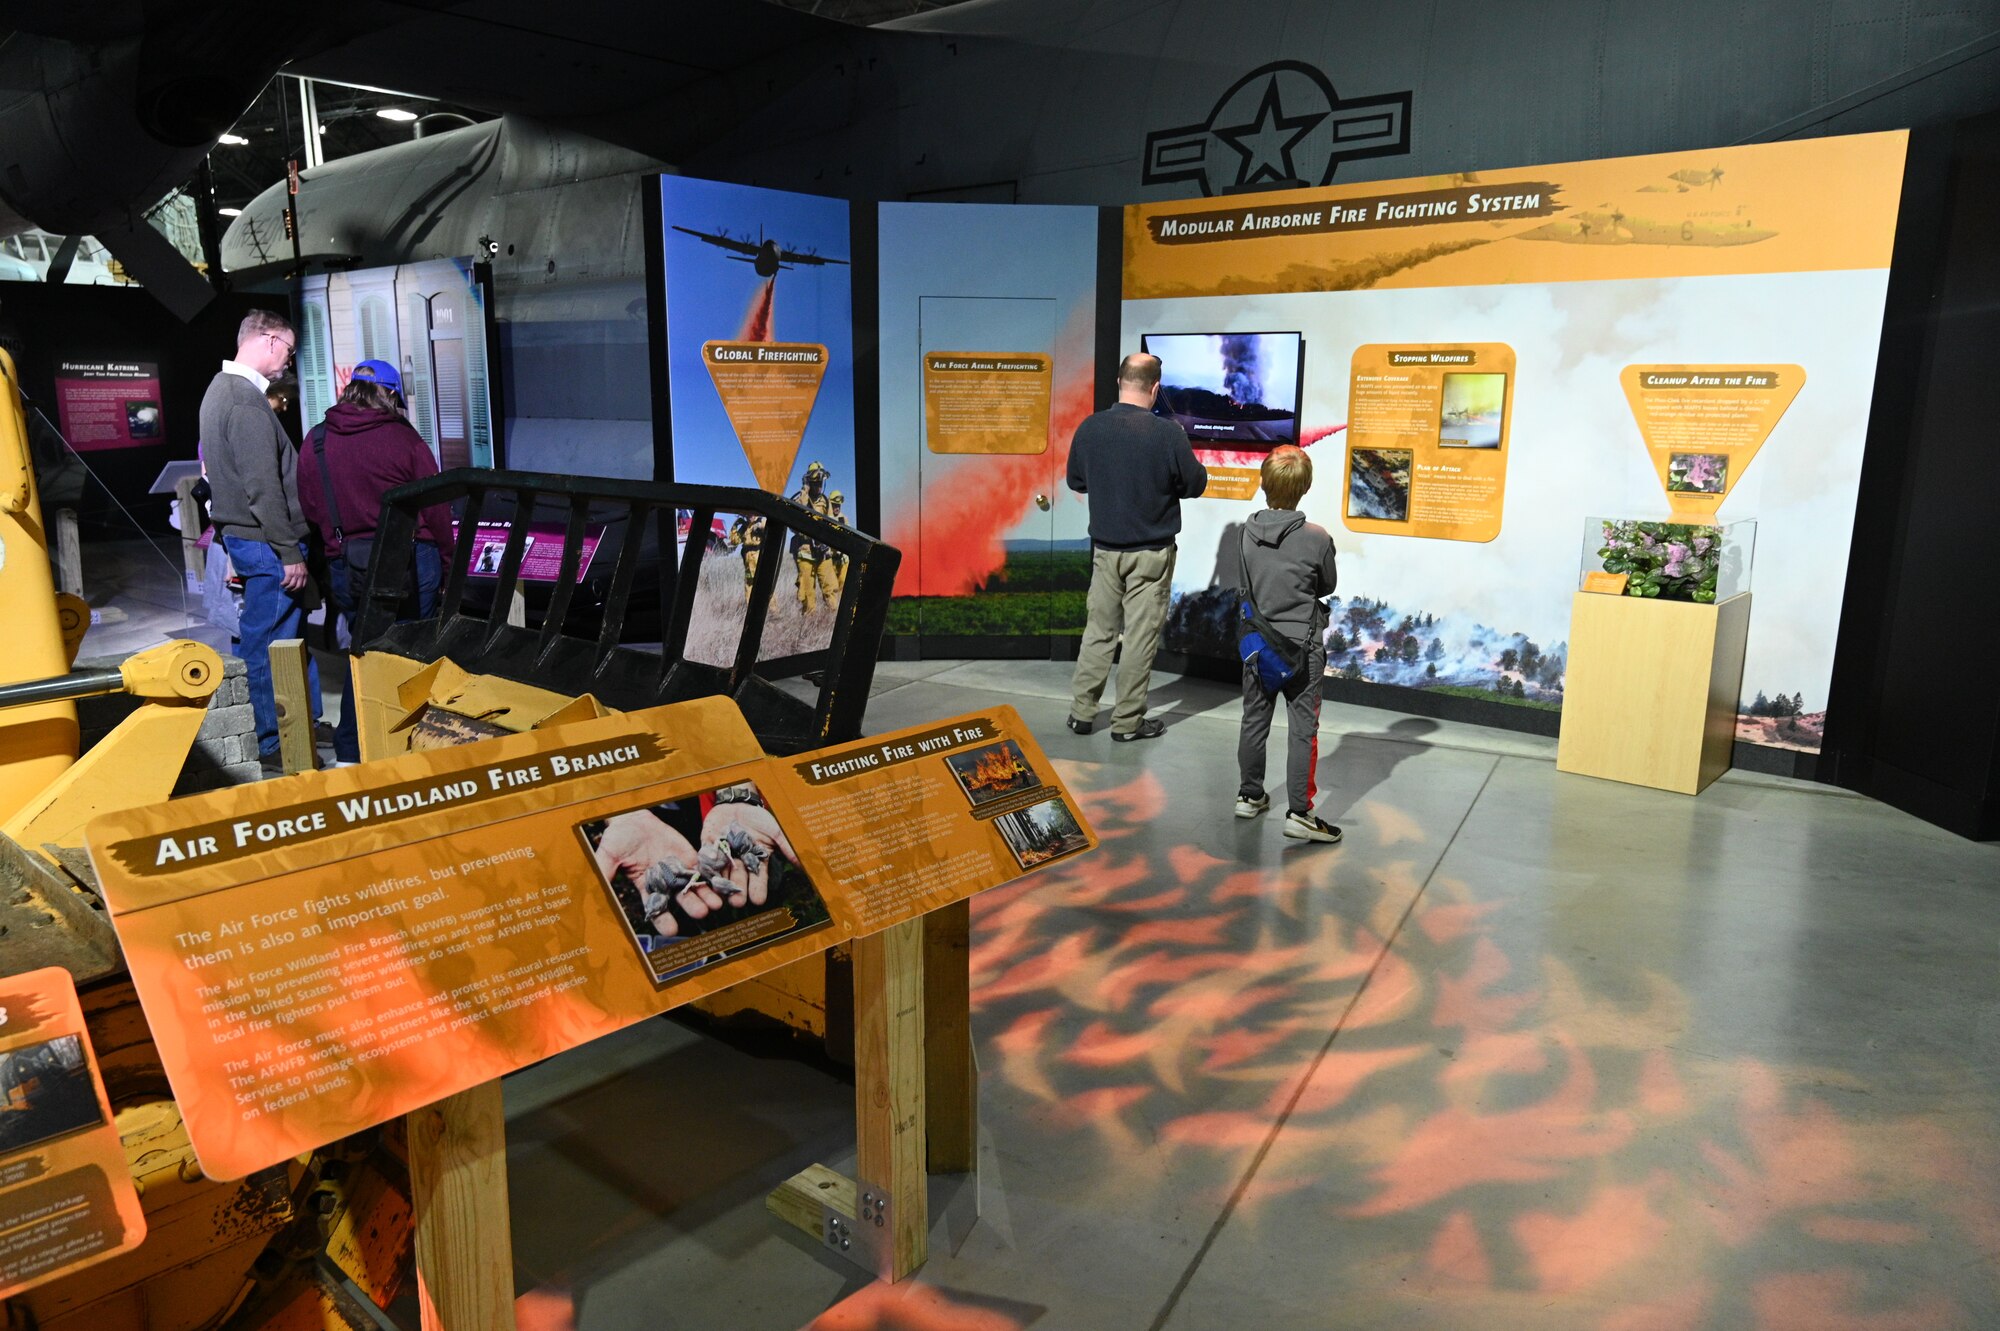 Image of the Global Firefighting mission portion of the Humanitarian Exhibit. On the left is a yellow panel with text descriptions in the exhibit. In the front of the picture is a family looking at a tall panel describing the wildlife firefighting process.